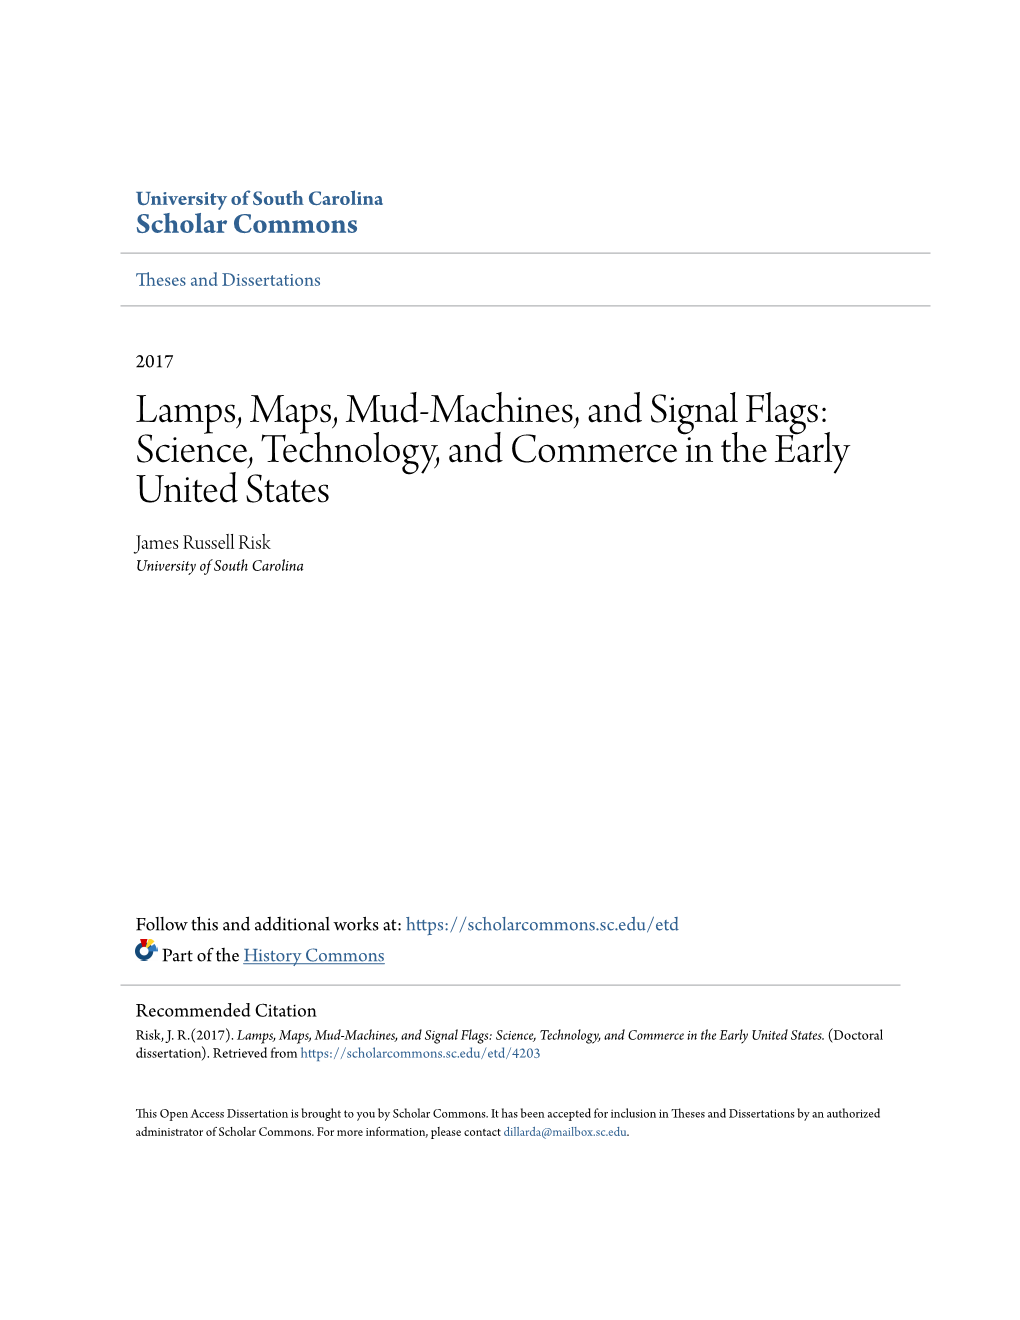 Lamps, Maps, Mud-Machines, and Signal Flags: Science, Technology, and Commerce in the Early United States James Russell Risk University of South Carolina